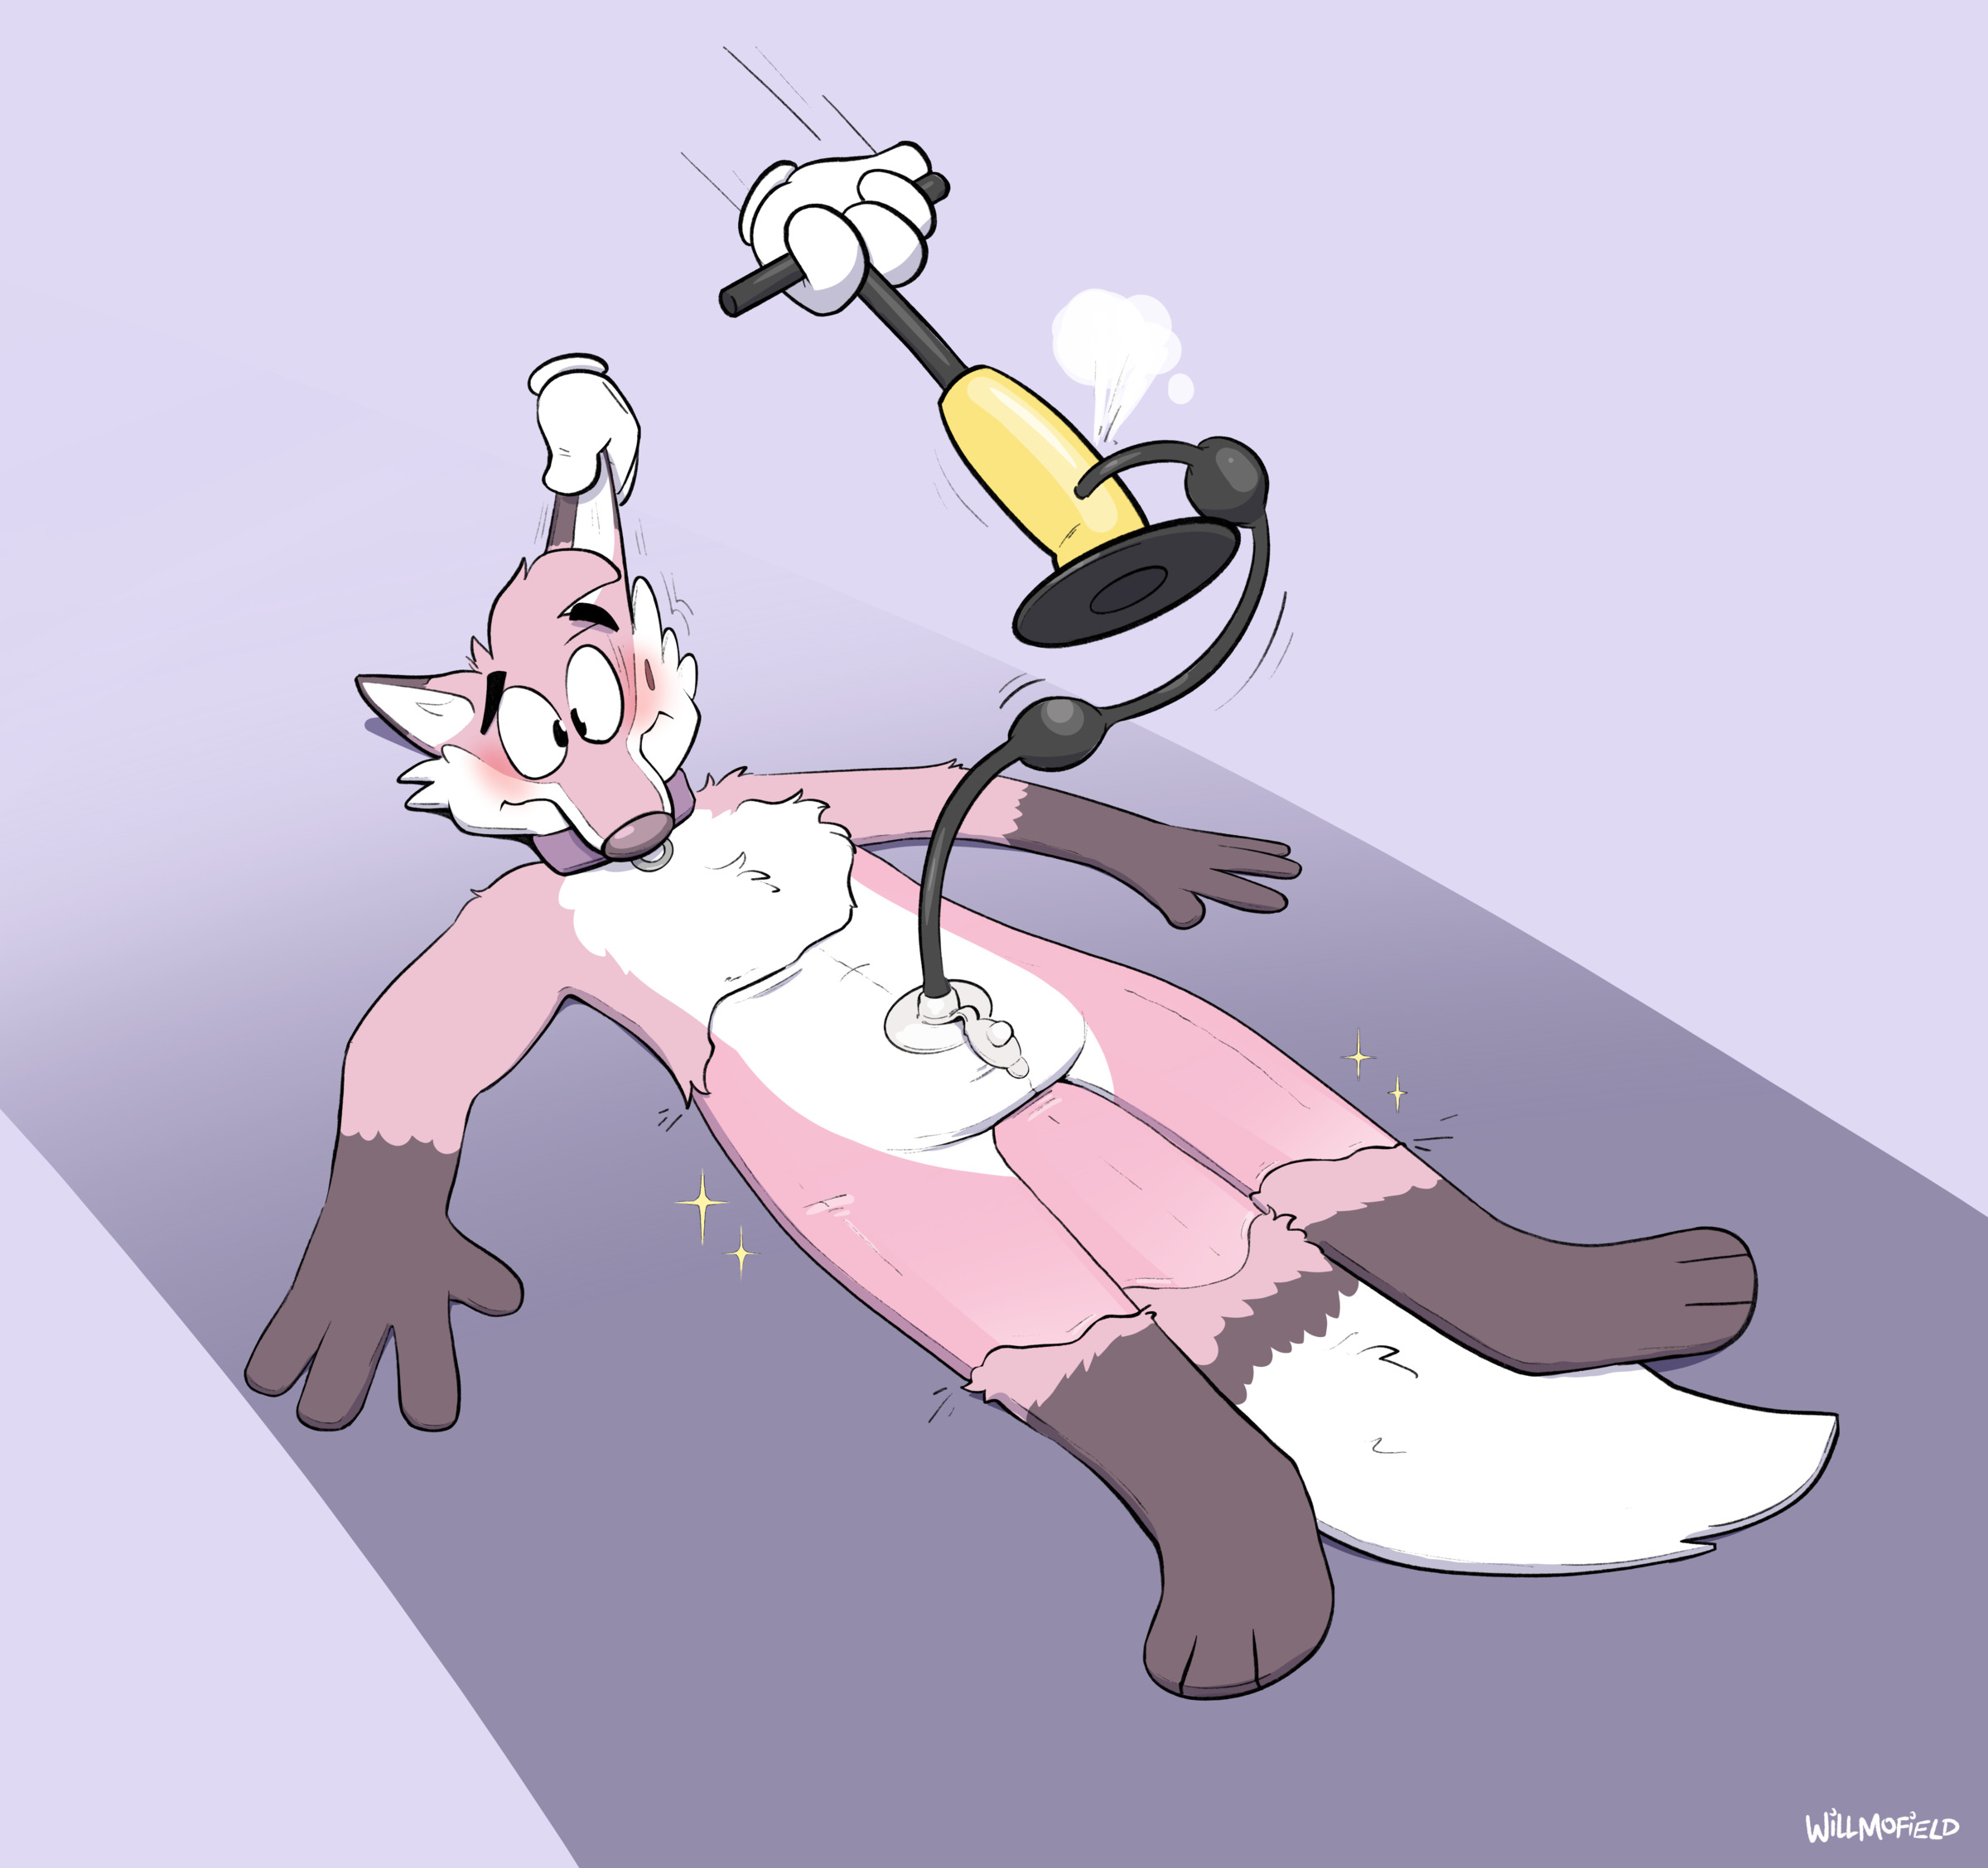 A drawing of a cartoon fox being inflated with a bike pump.